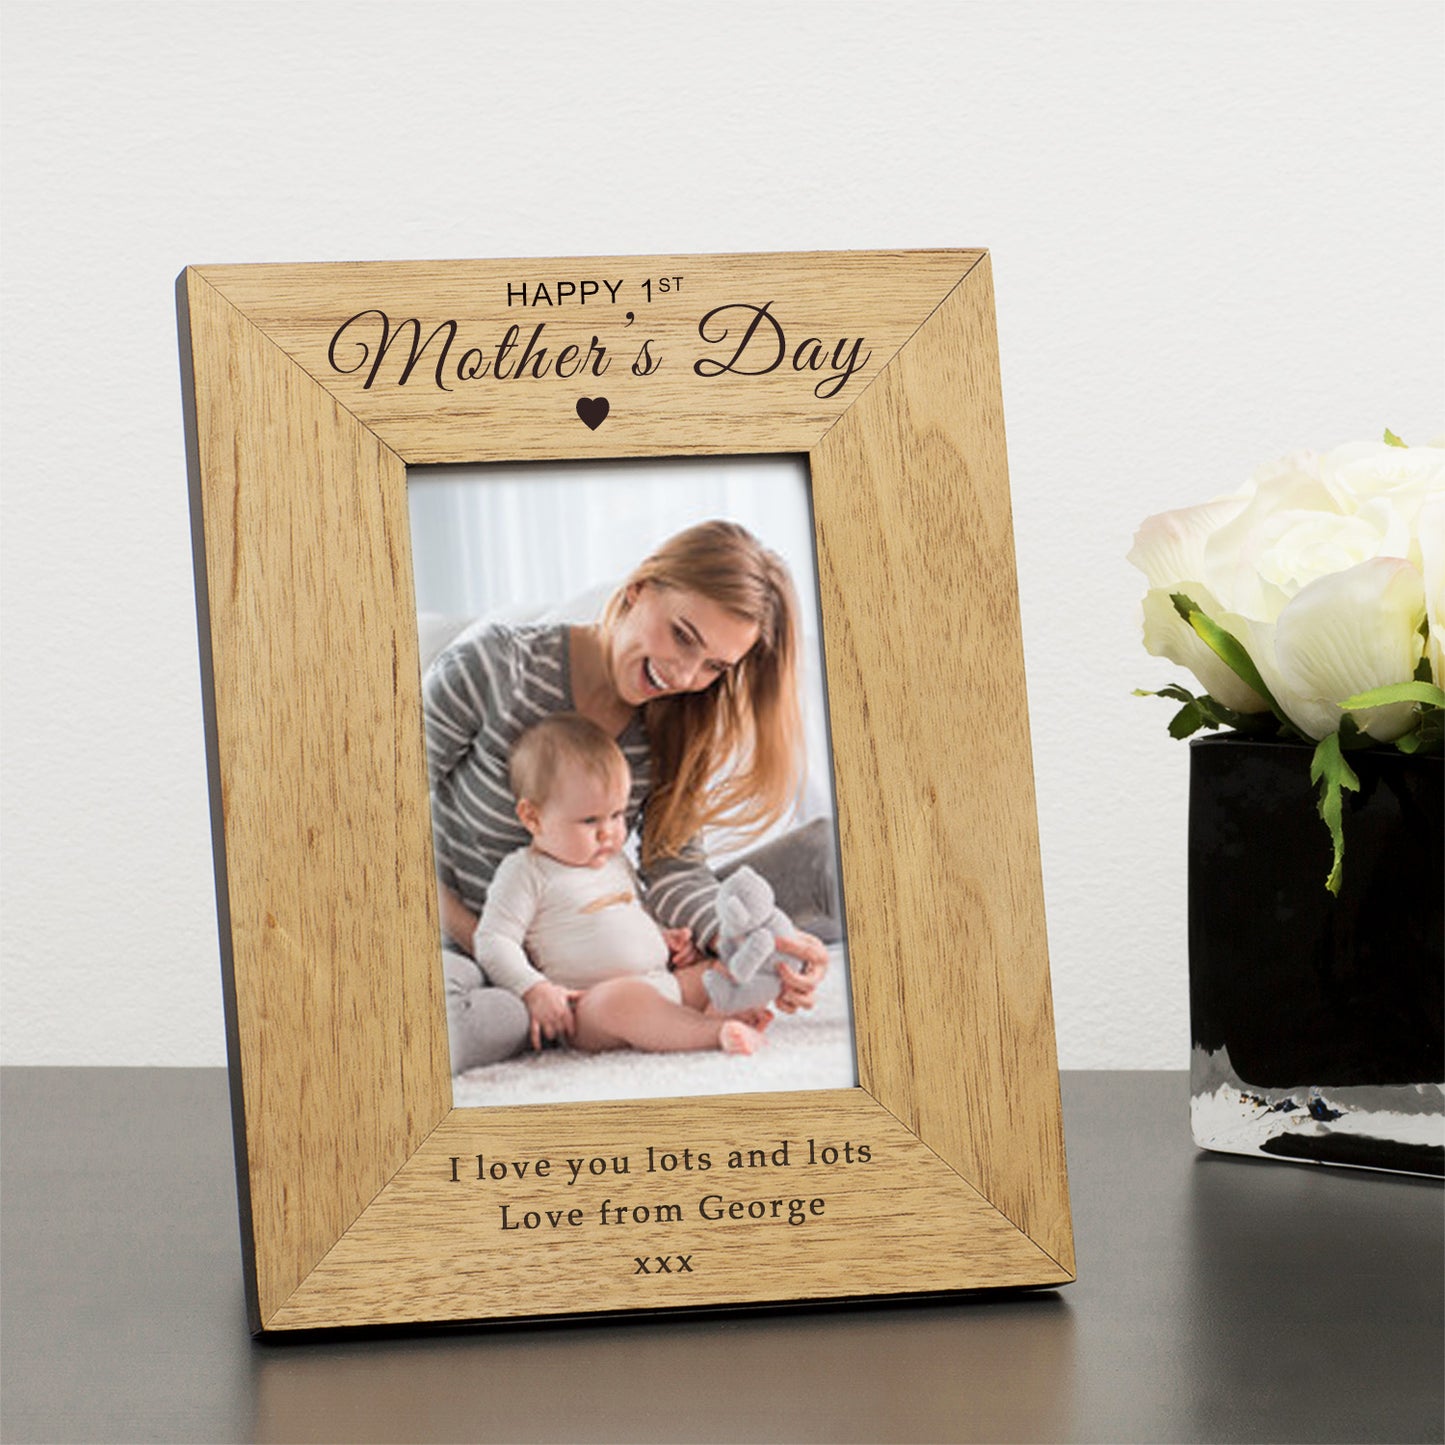 Personalised Happy 1st Mothers Day Wood Photo Frame 6x4